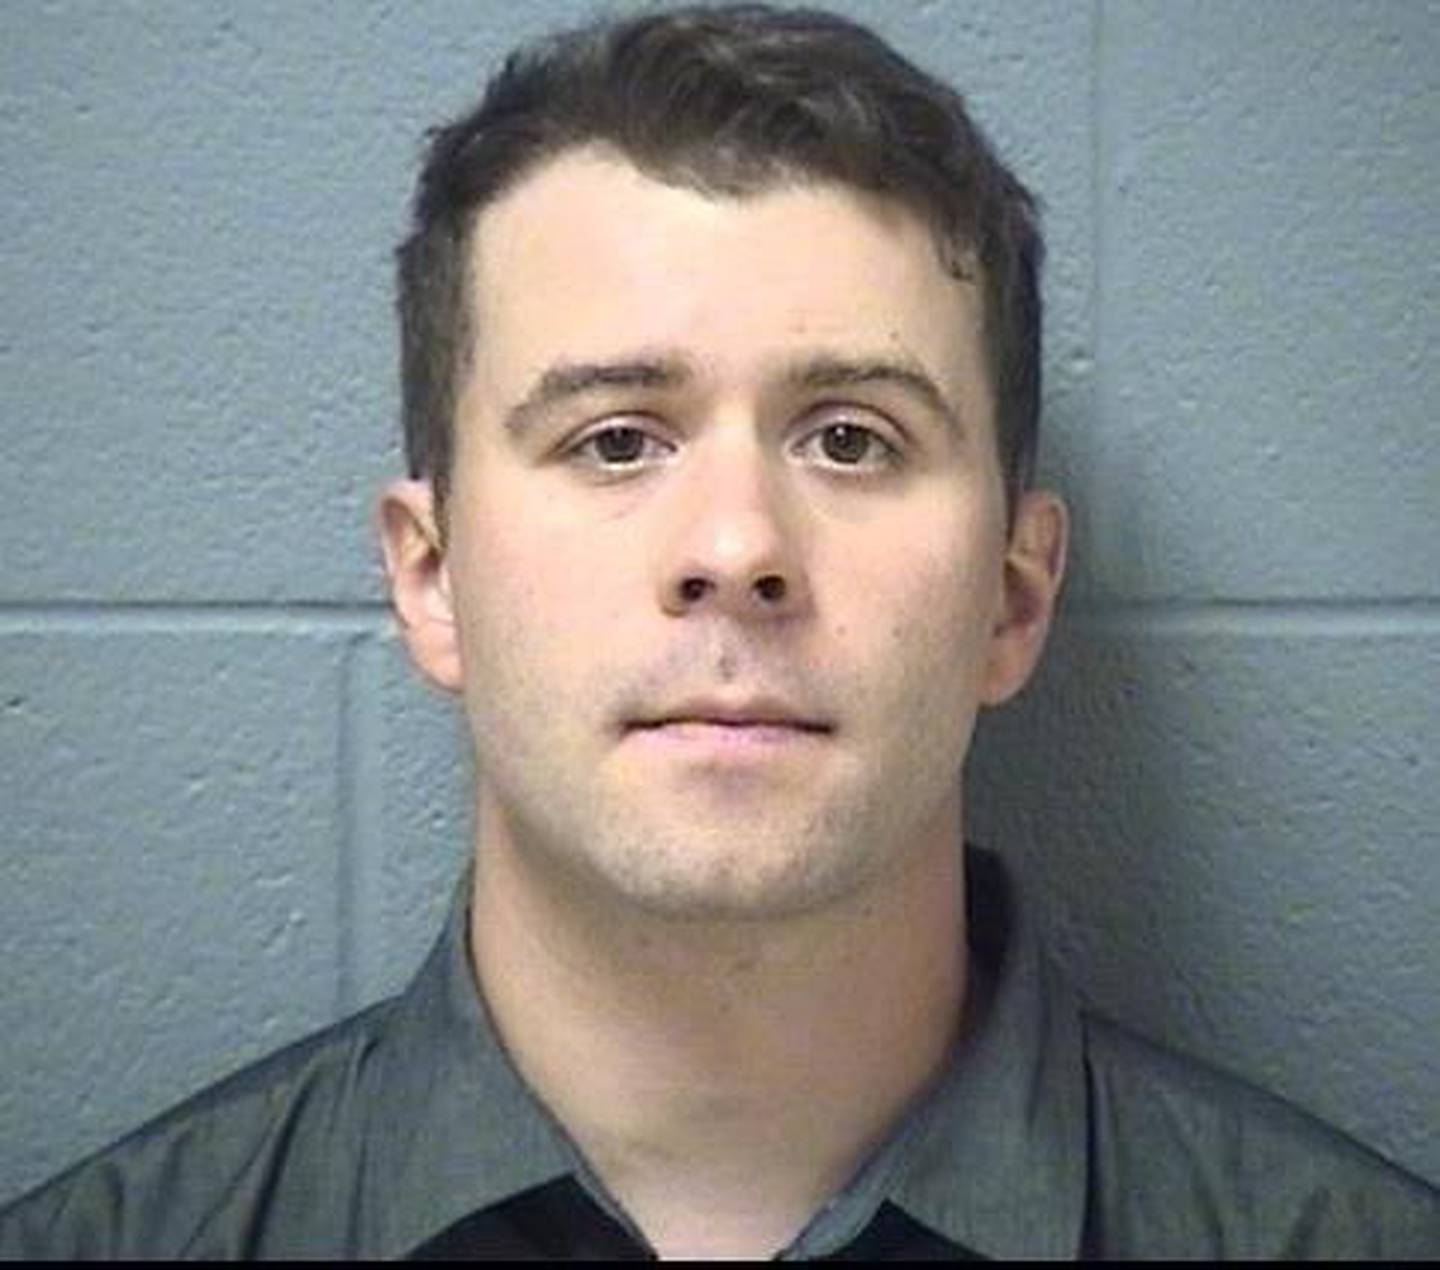 Ryan Thompson (pictured) pleaded guilty to secretly recording videos of underage girls in a locker room while he was working as a janitor at Chaney-Monge School in Crest Hill.